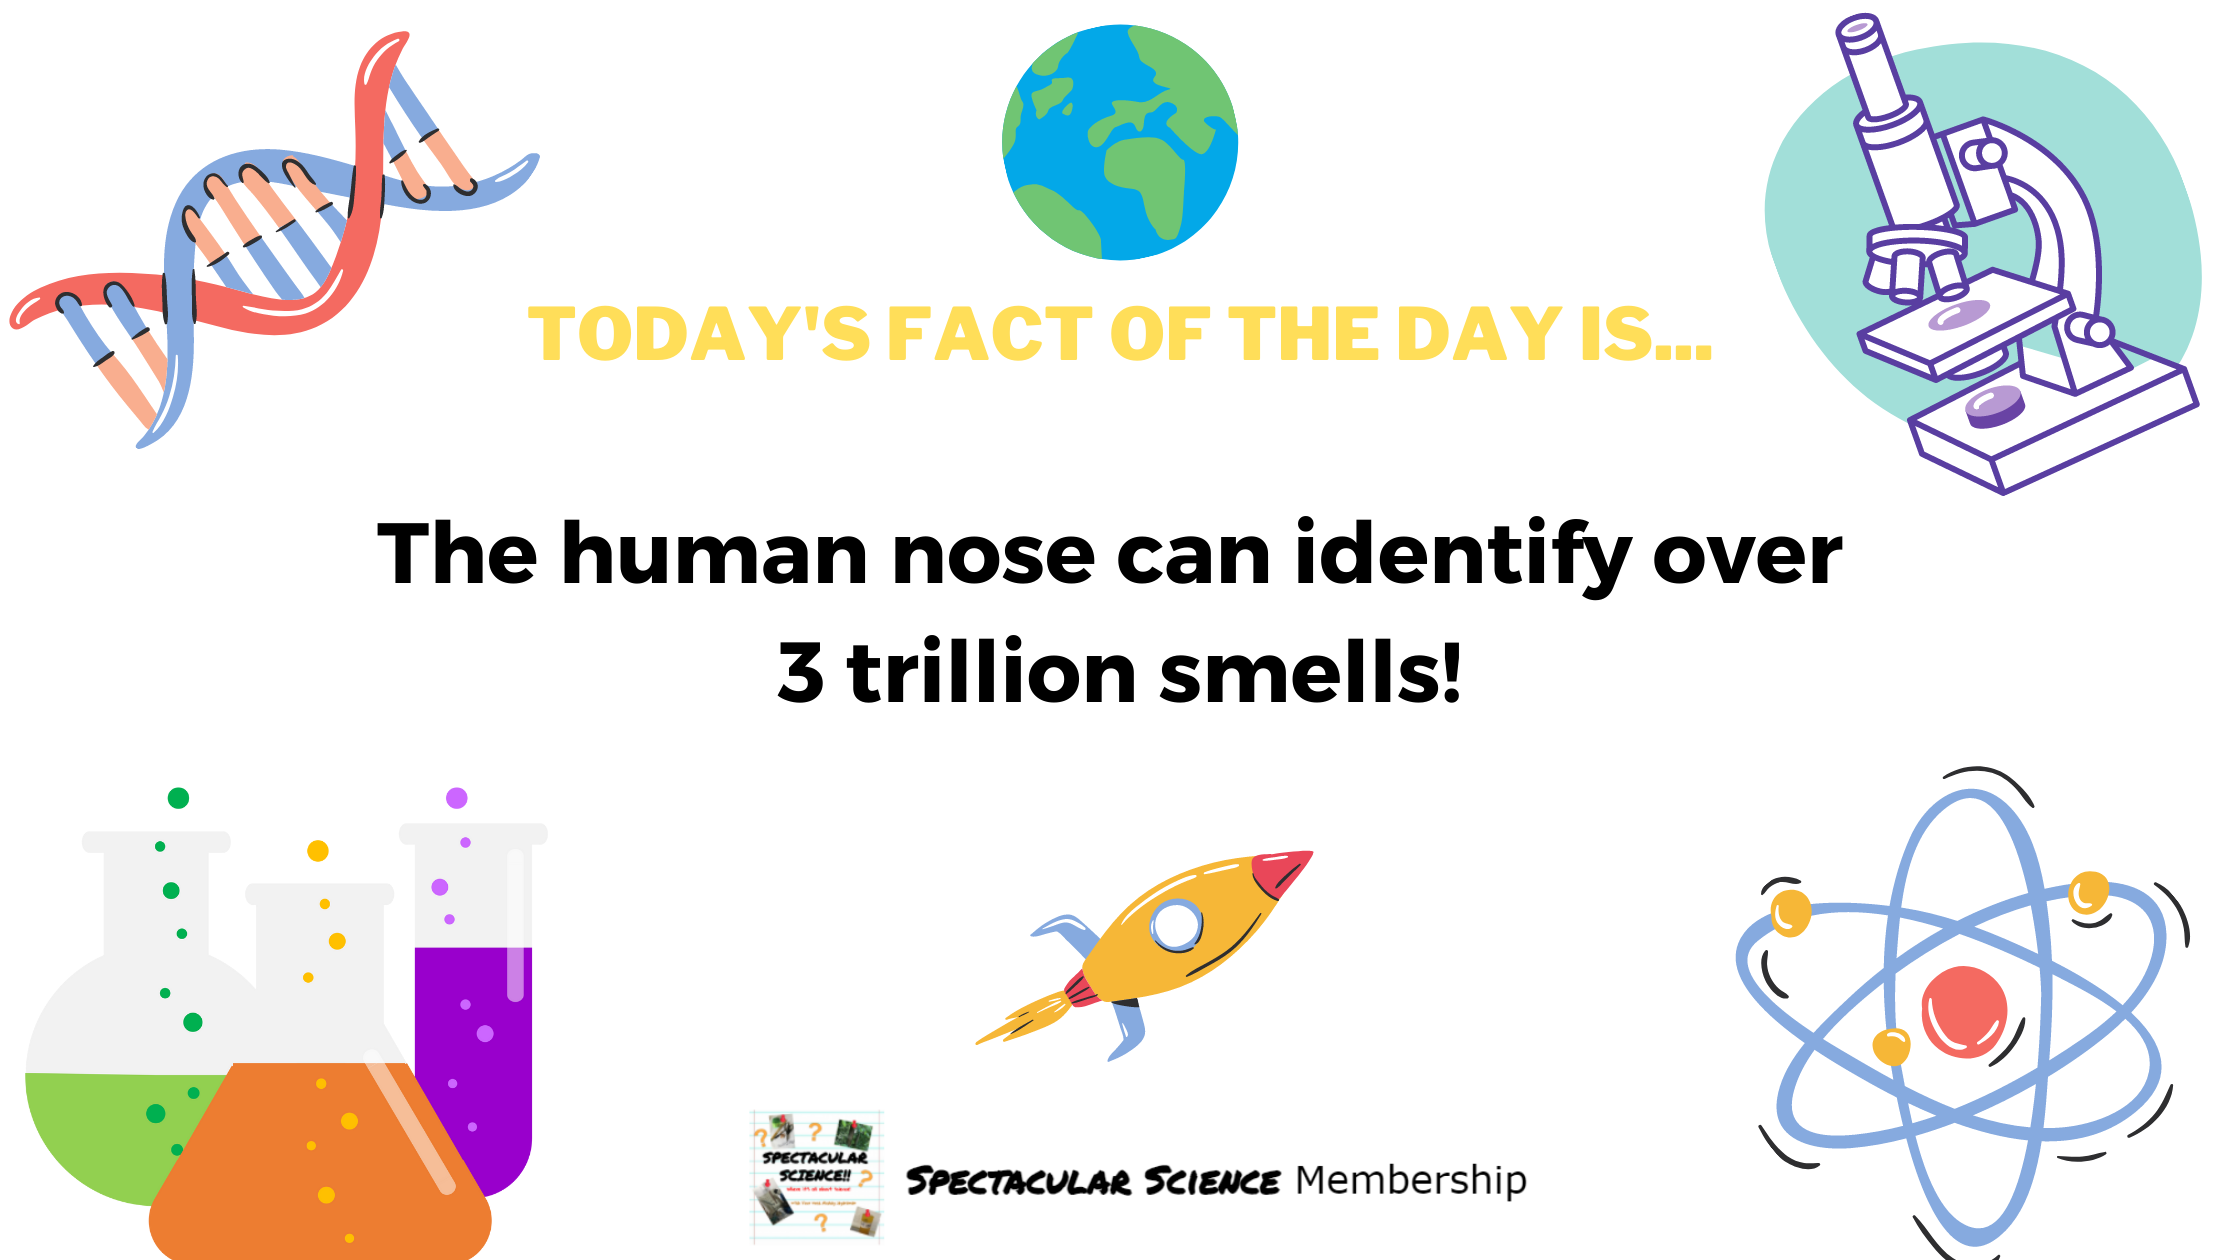 Fact of the Day Image Dec. 30th